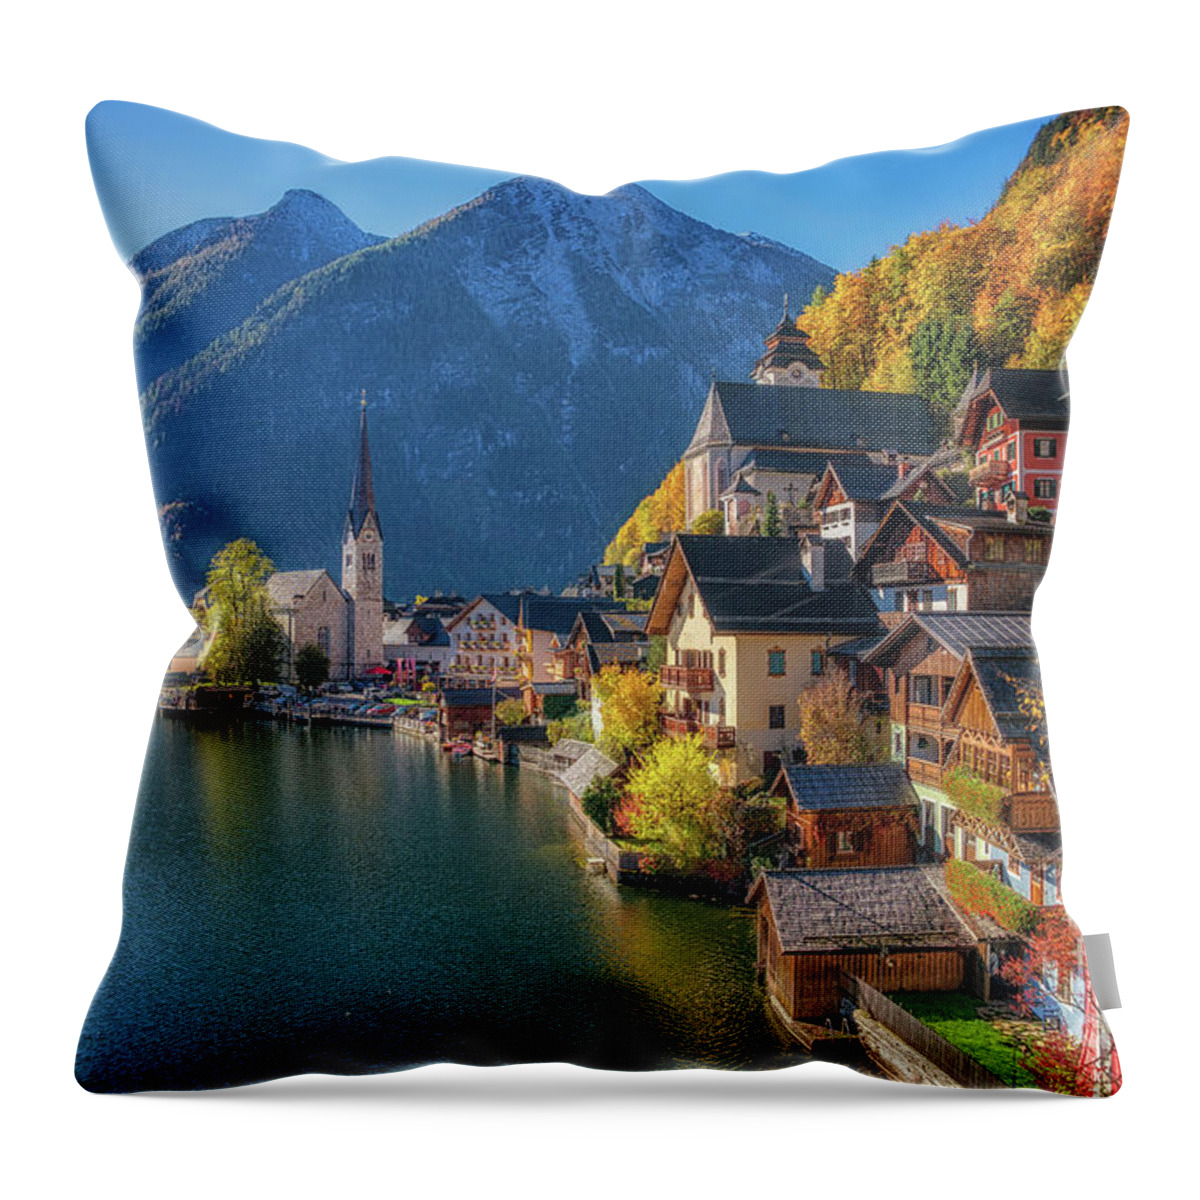 Alpine Throw Pillow featuring the photograph Colourful Hallstatt by JR Photography